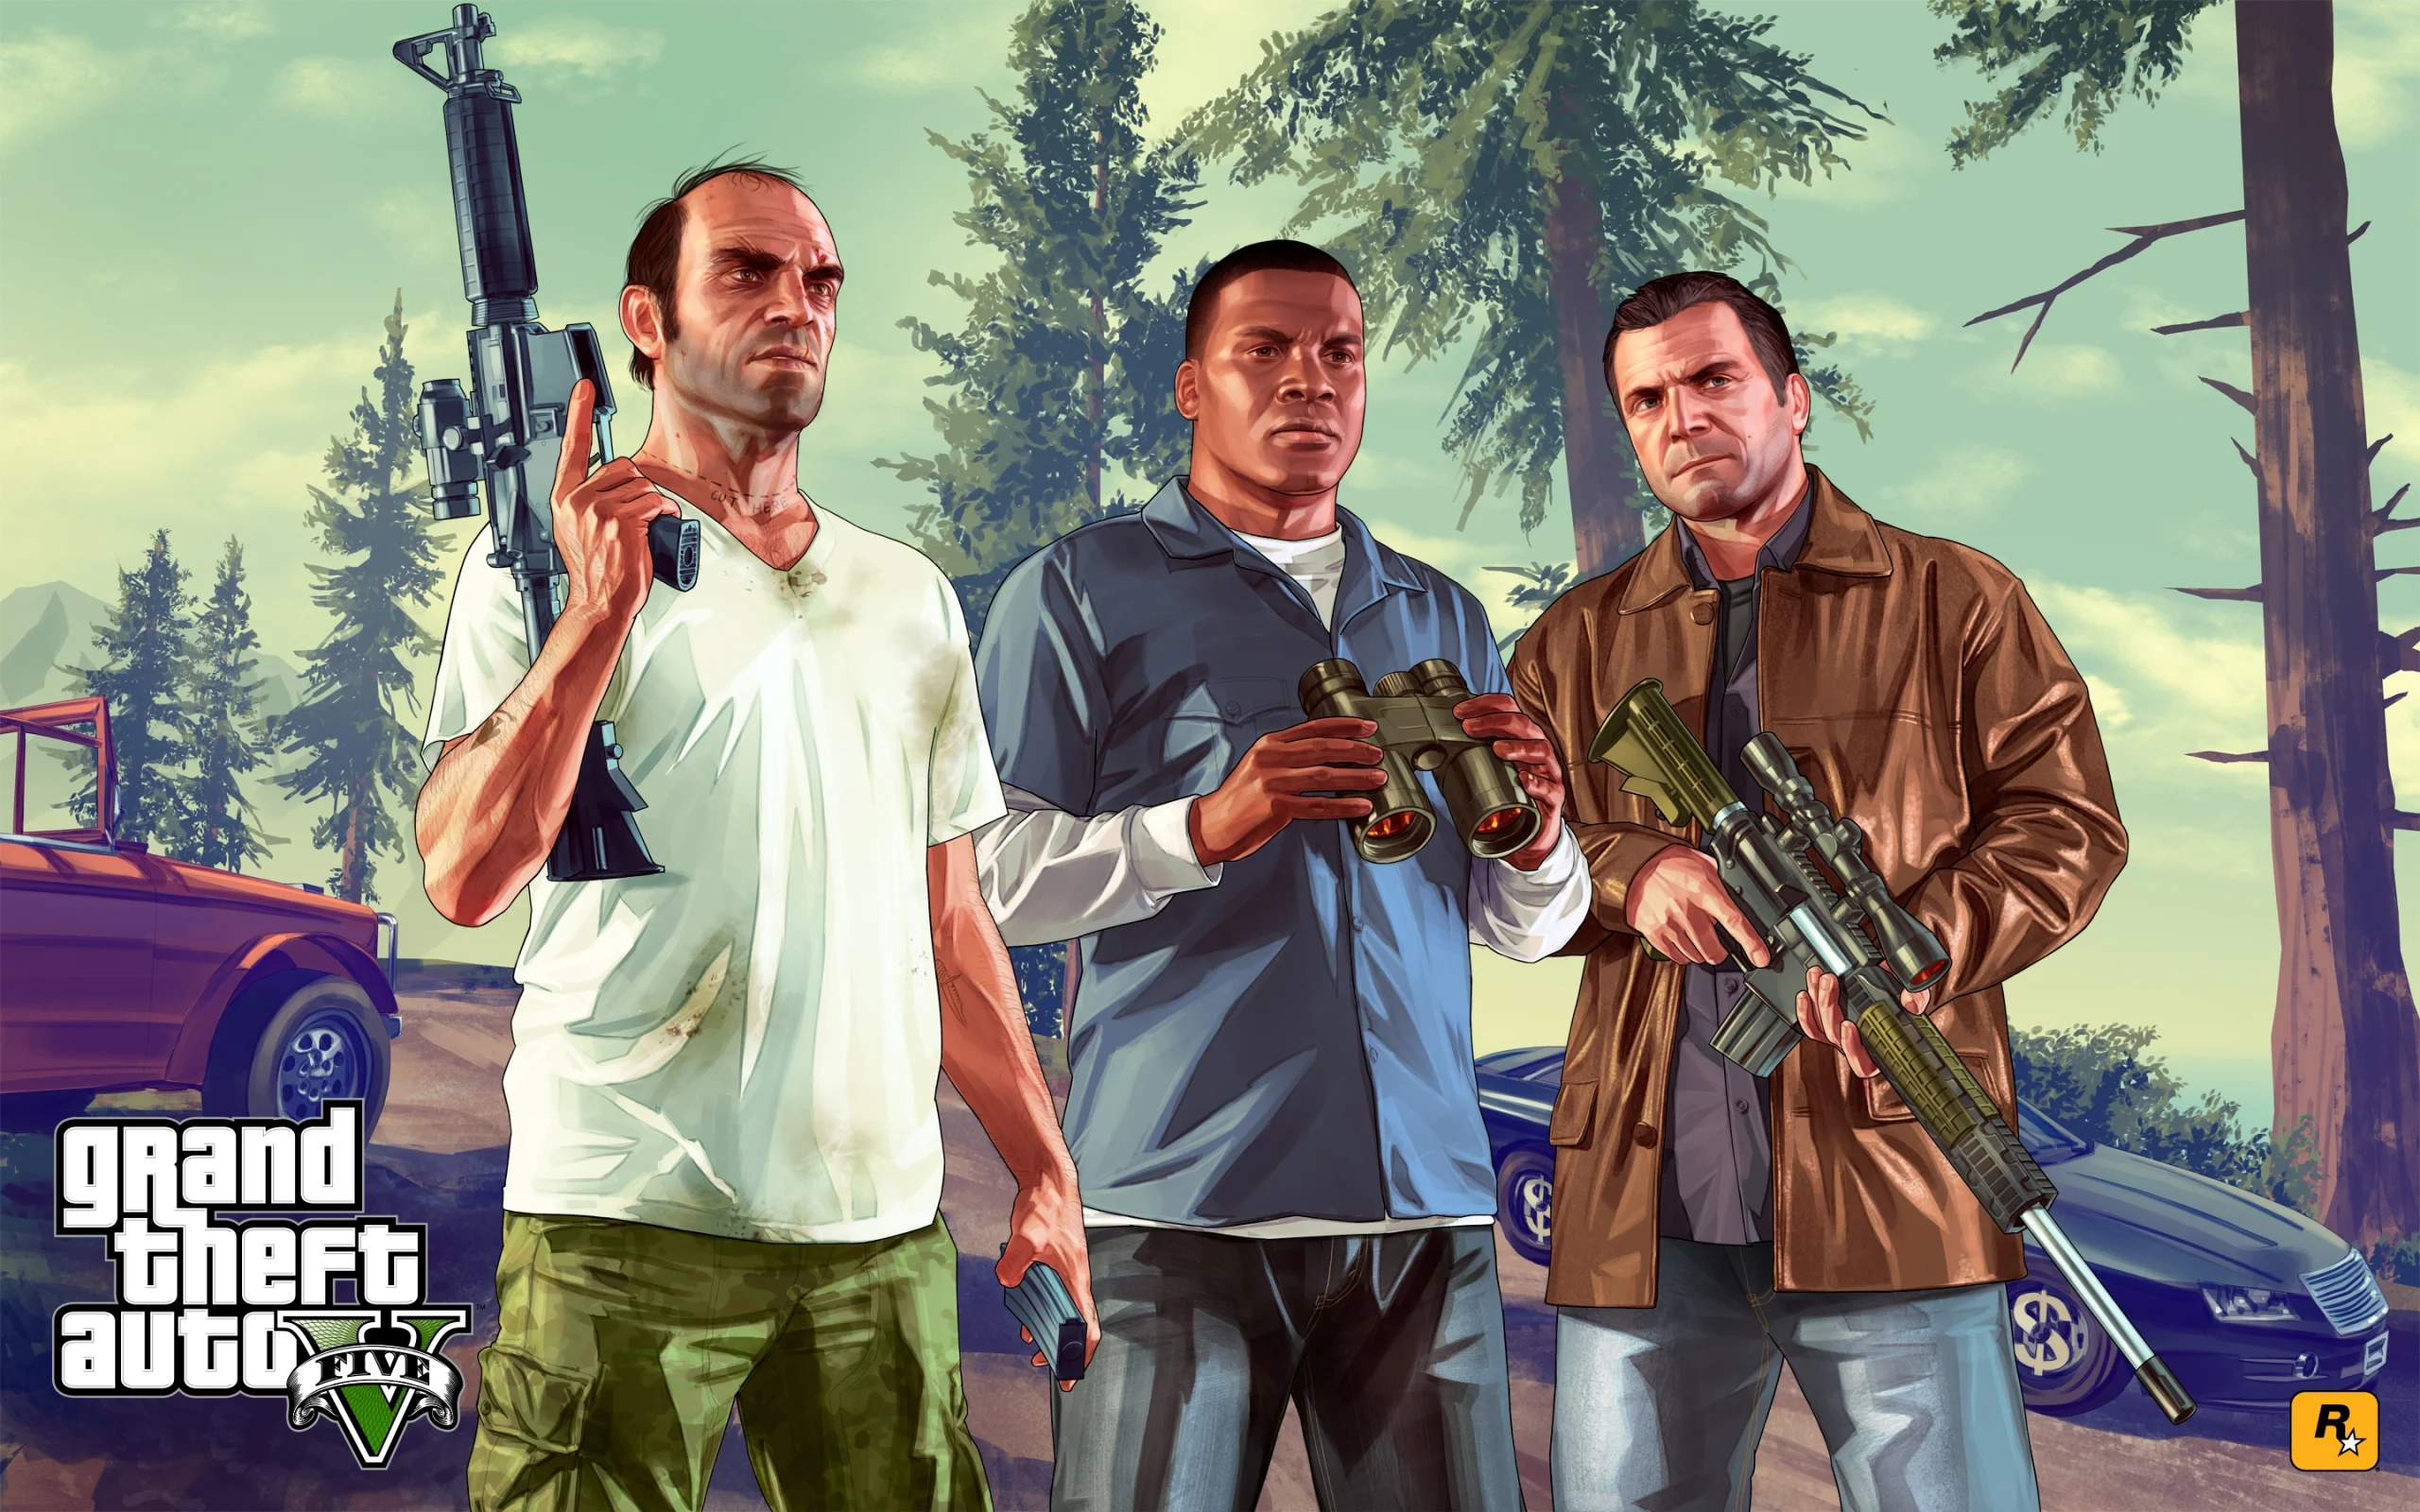 Leaked Details Reveal GTA 5's Liberty City Expansion Plans Scrapped for Online Gameplay-